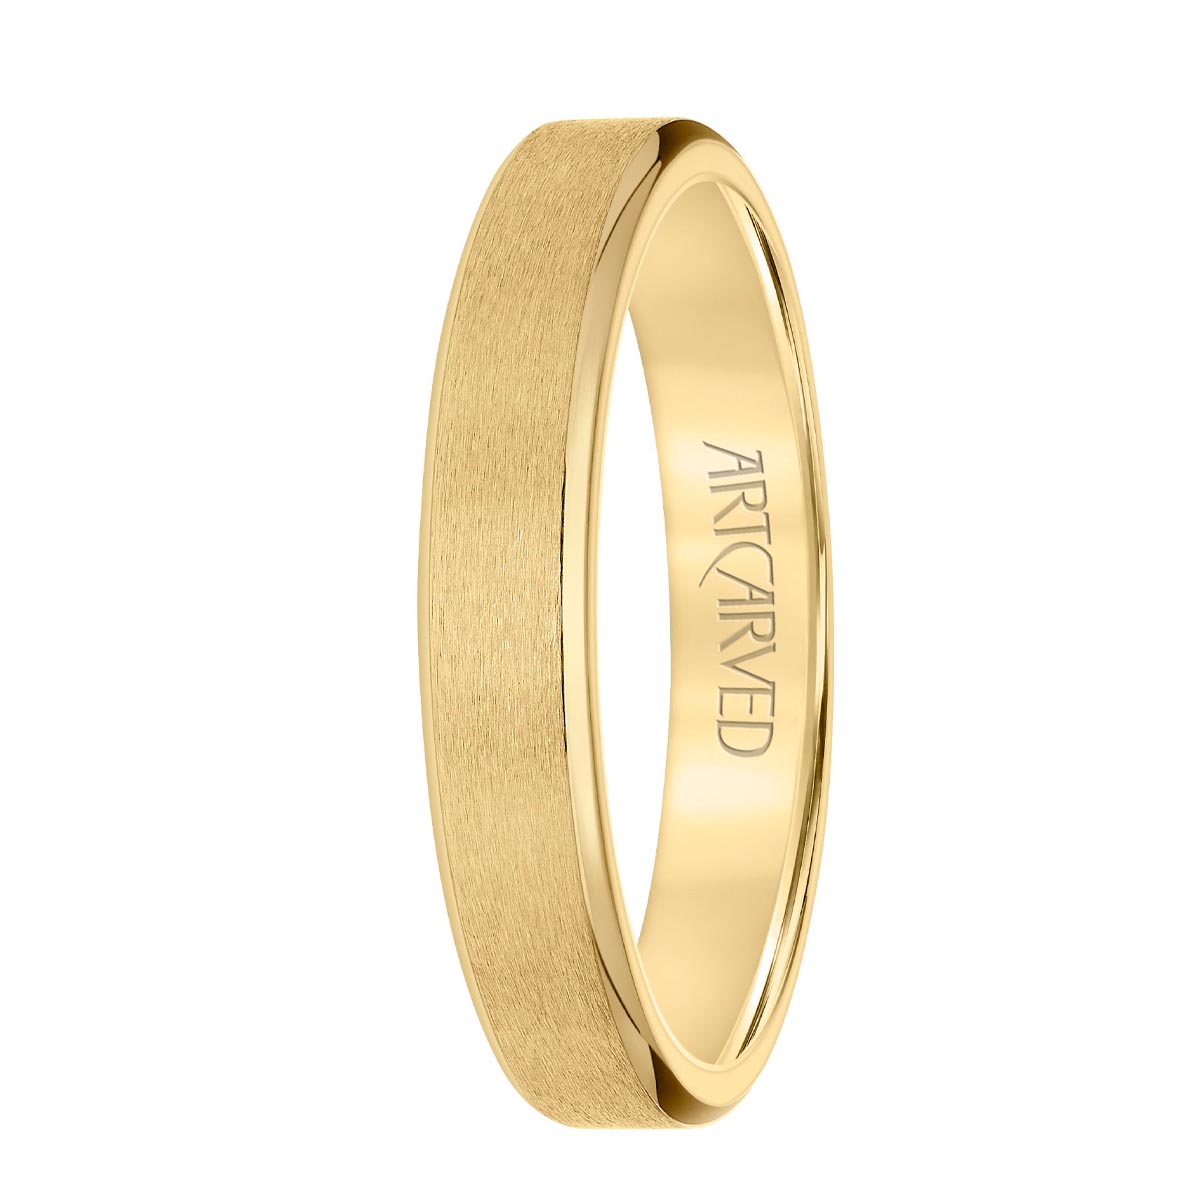 Men's Wedding Band in 14kt Yellow Gold (4mm)